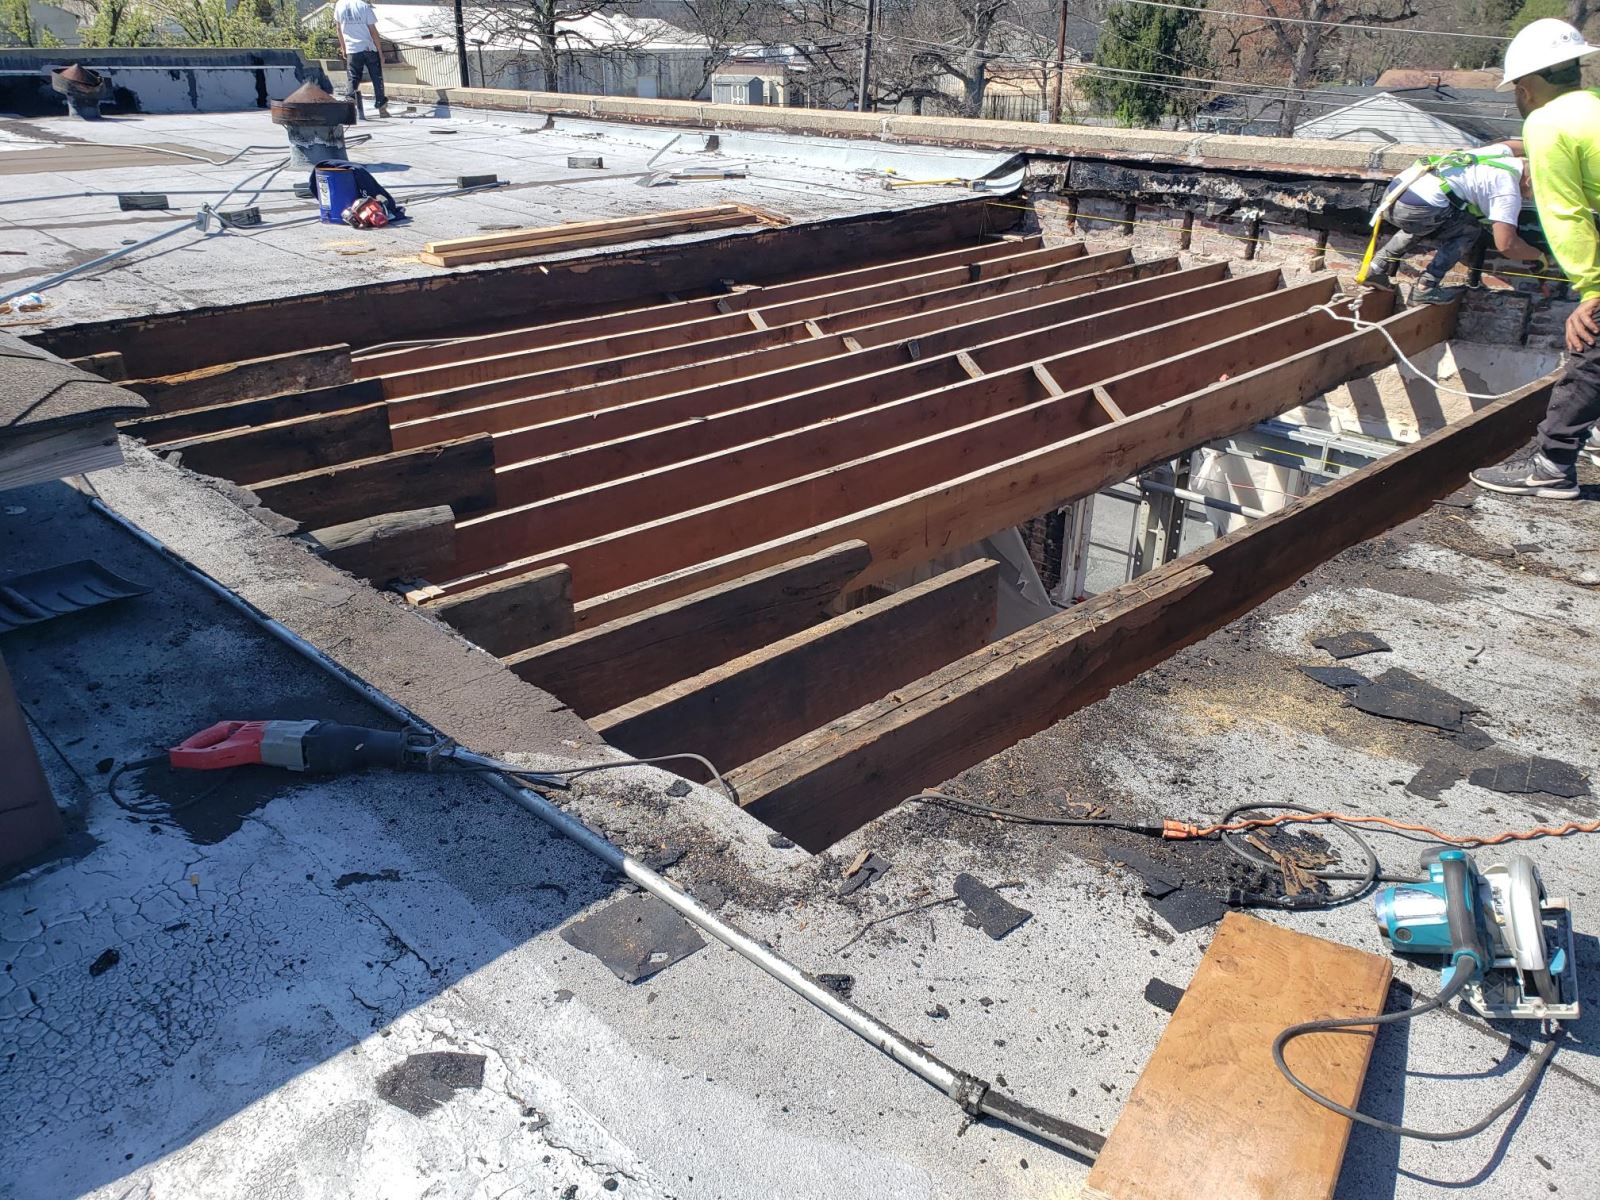 Installation of the new Wooden Roof structure